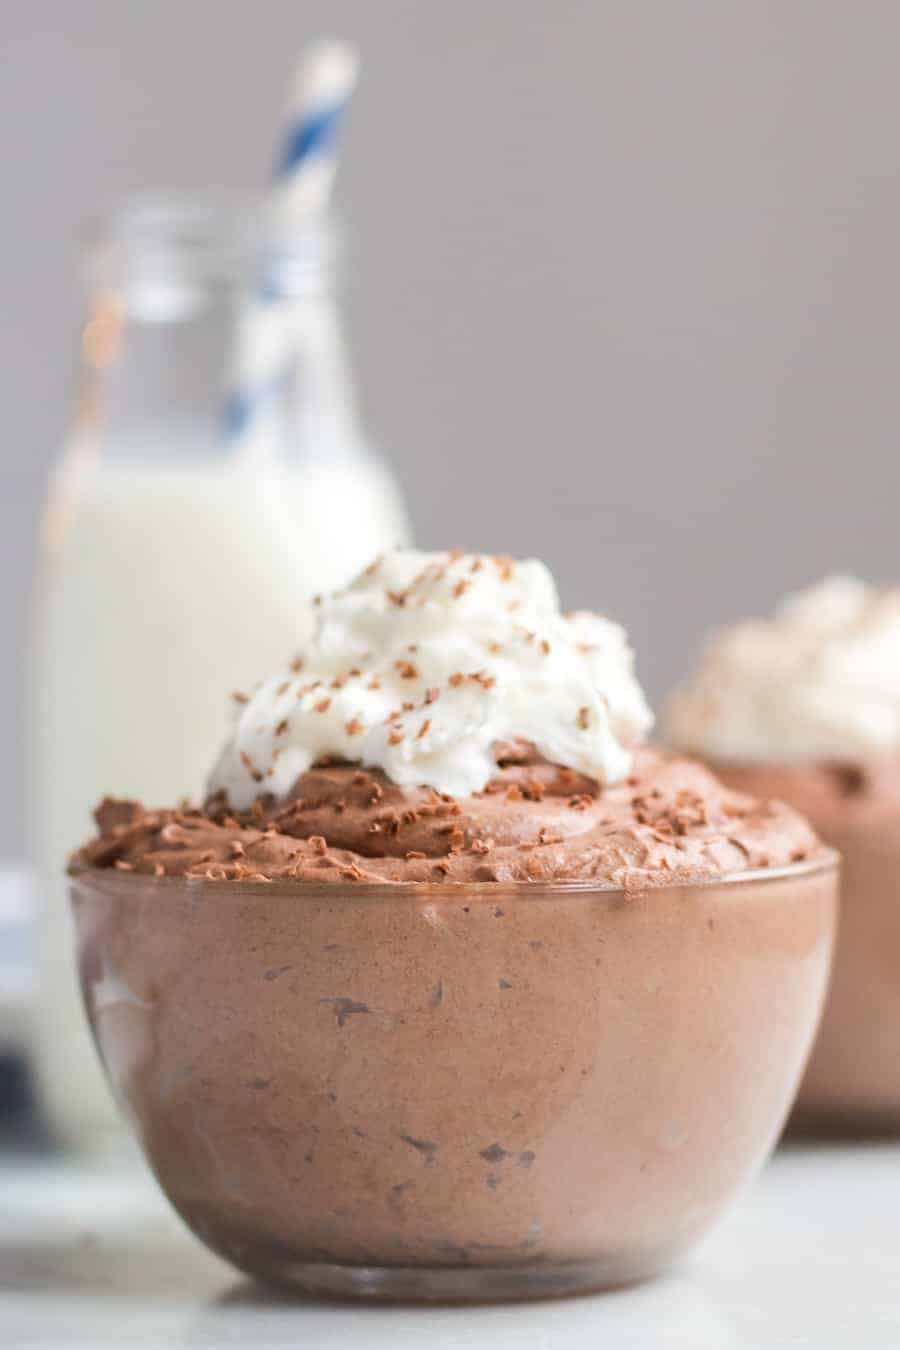 Small glass bowl filled with chocolate mousse and topped with whipped cream and chocolate shavings with a bottle of milk and another bowl of mousse in the background. 